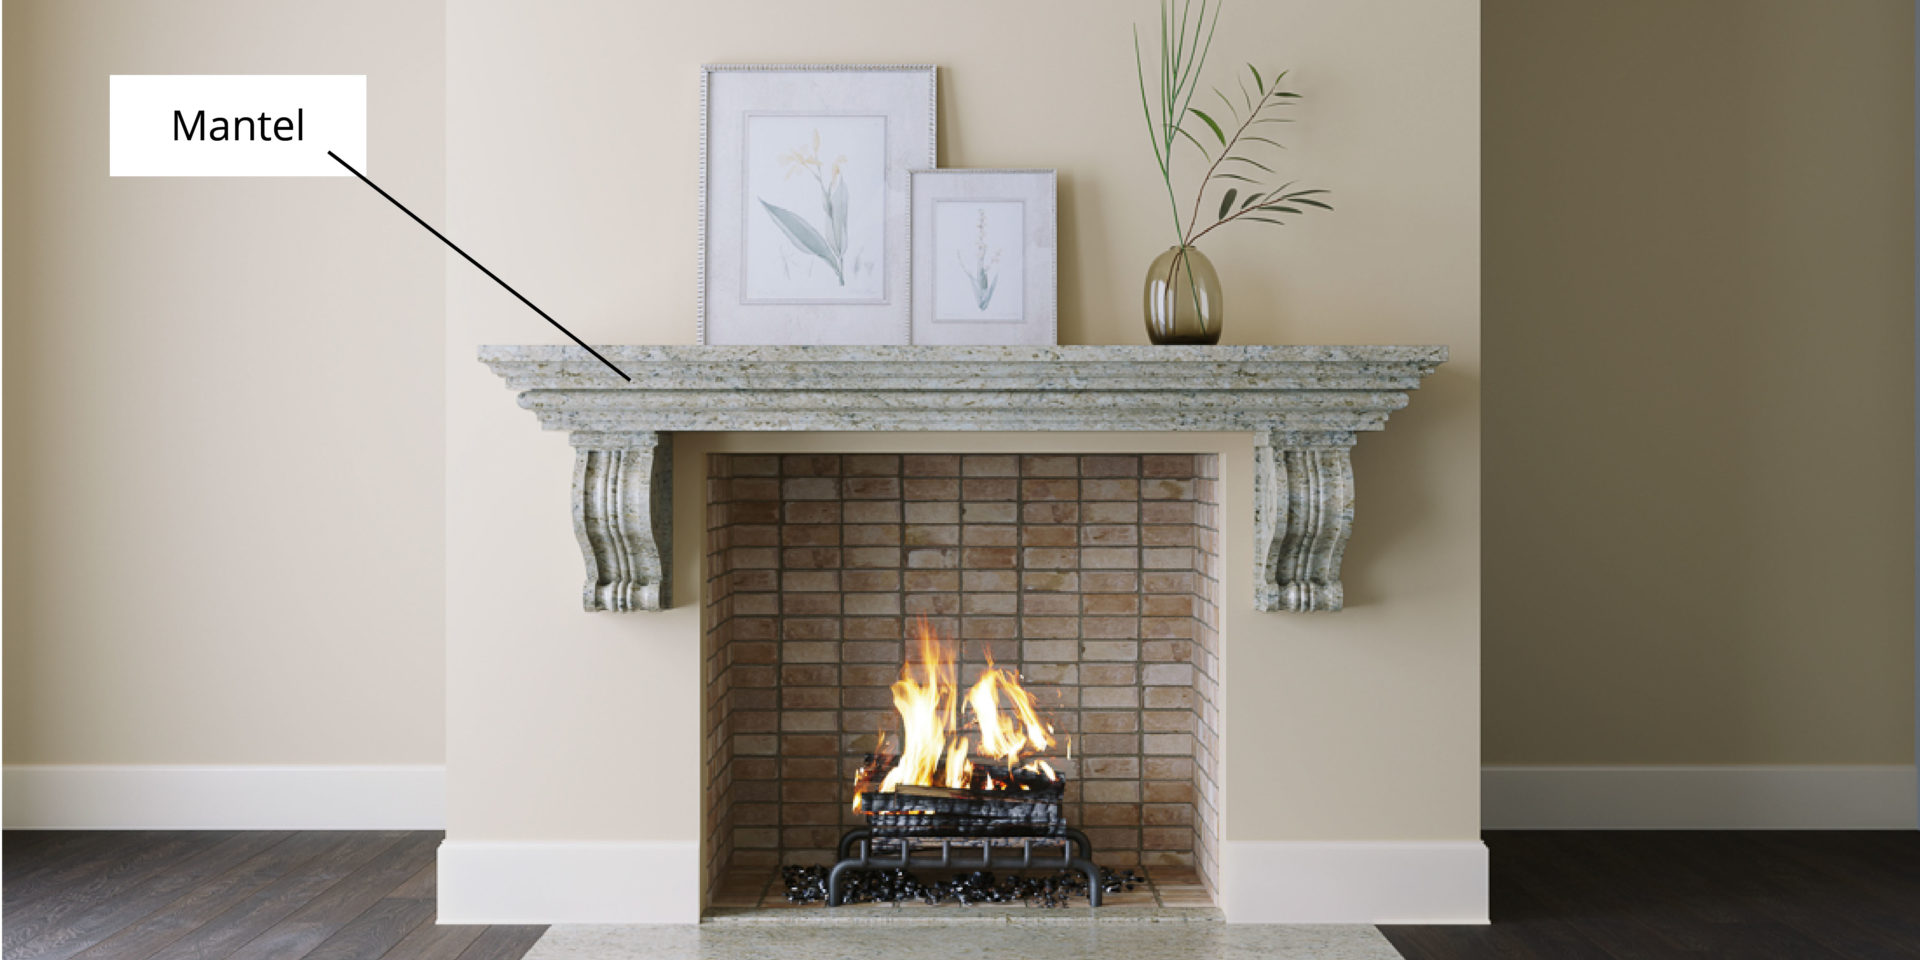 Image featuring a fireplace mantel